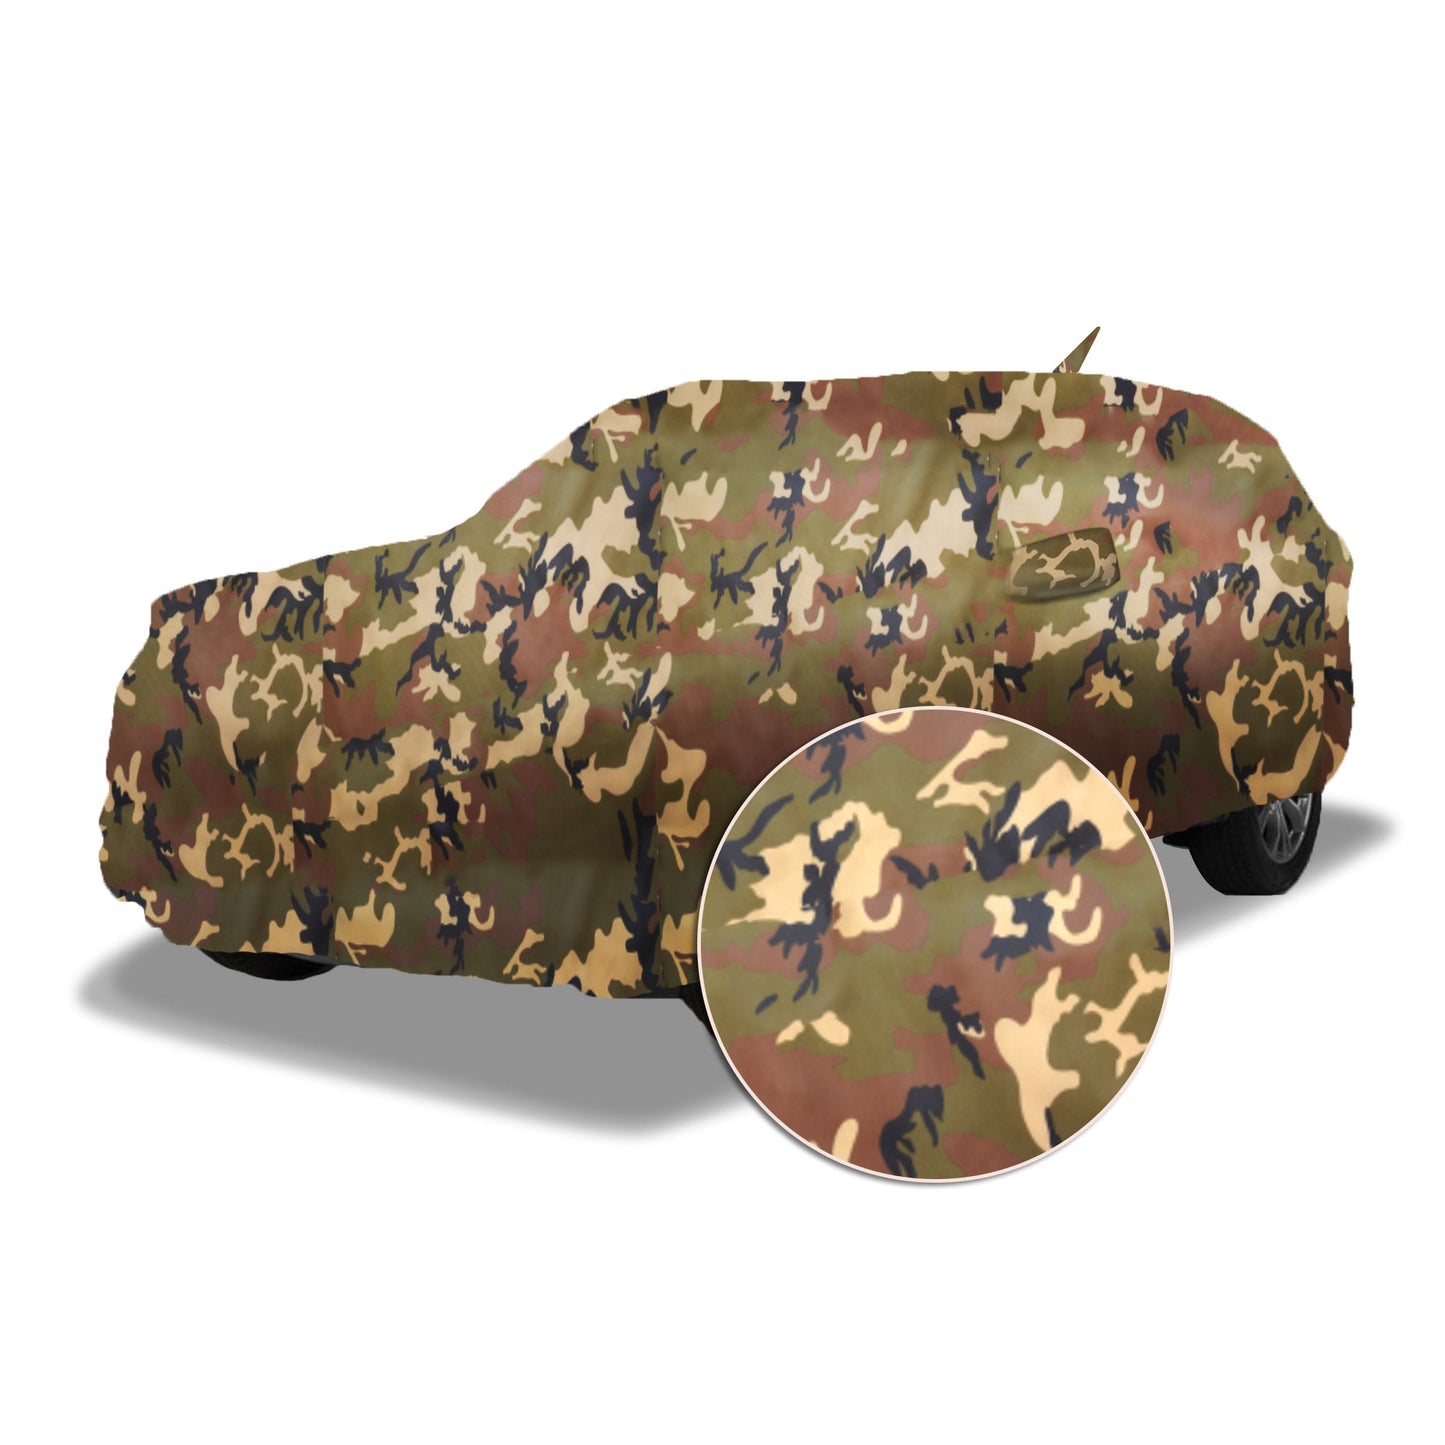 Ascot Tata Tiago Car Body Cover Extra Strong & Dust Proof Jungle Military Car Cover with UV Proof & Water-Resistant Coating